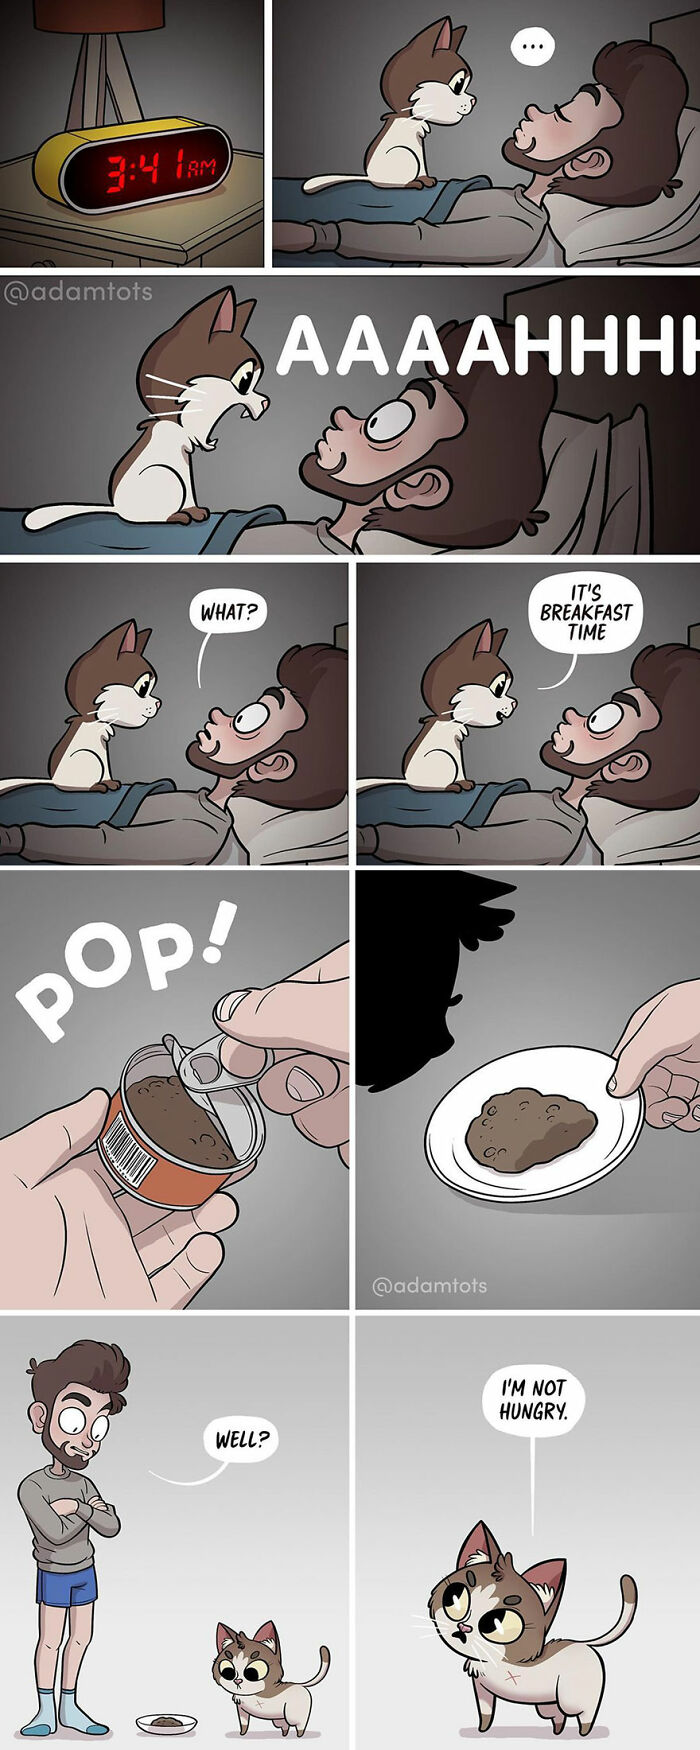 Funny Comics That Reveal Everyday Life With A Touch Of Humor By Adam Ellis